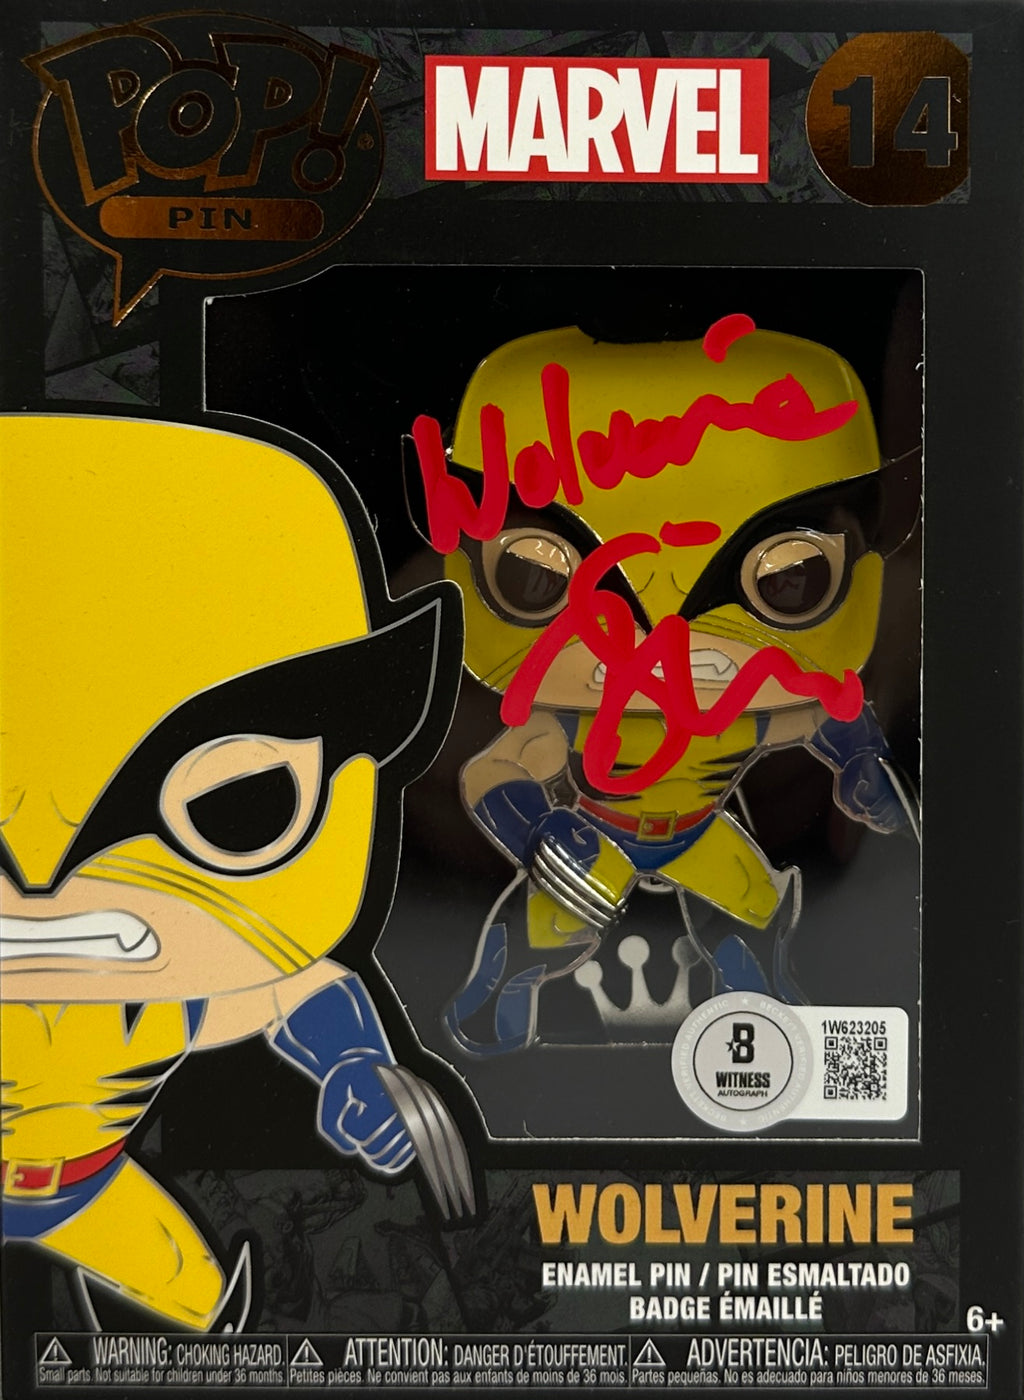 Tony Daniels autographed signed inscribed Funko Pin #14 Wolverine X-Men